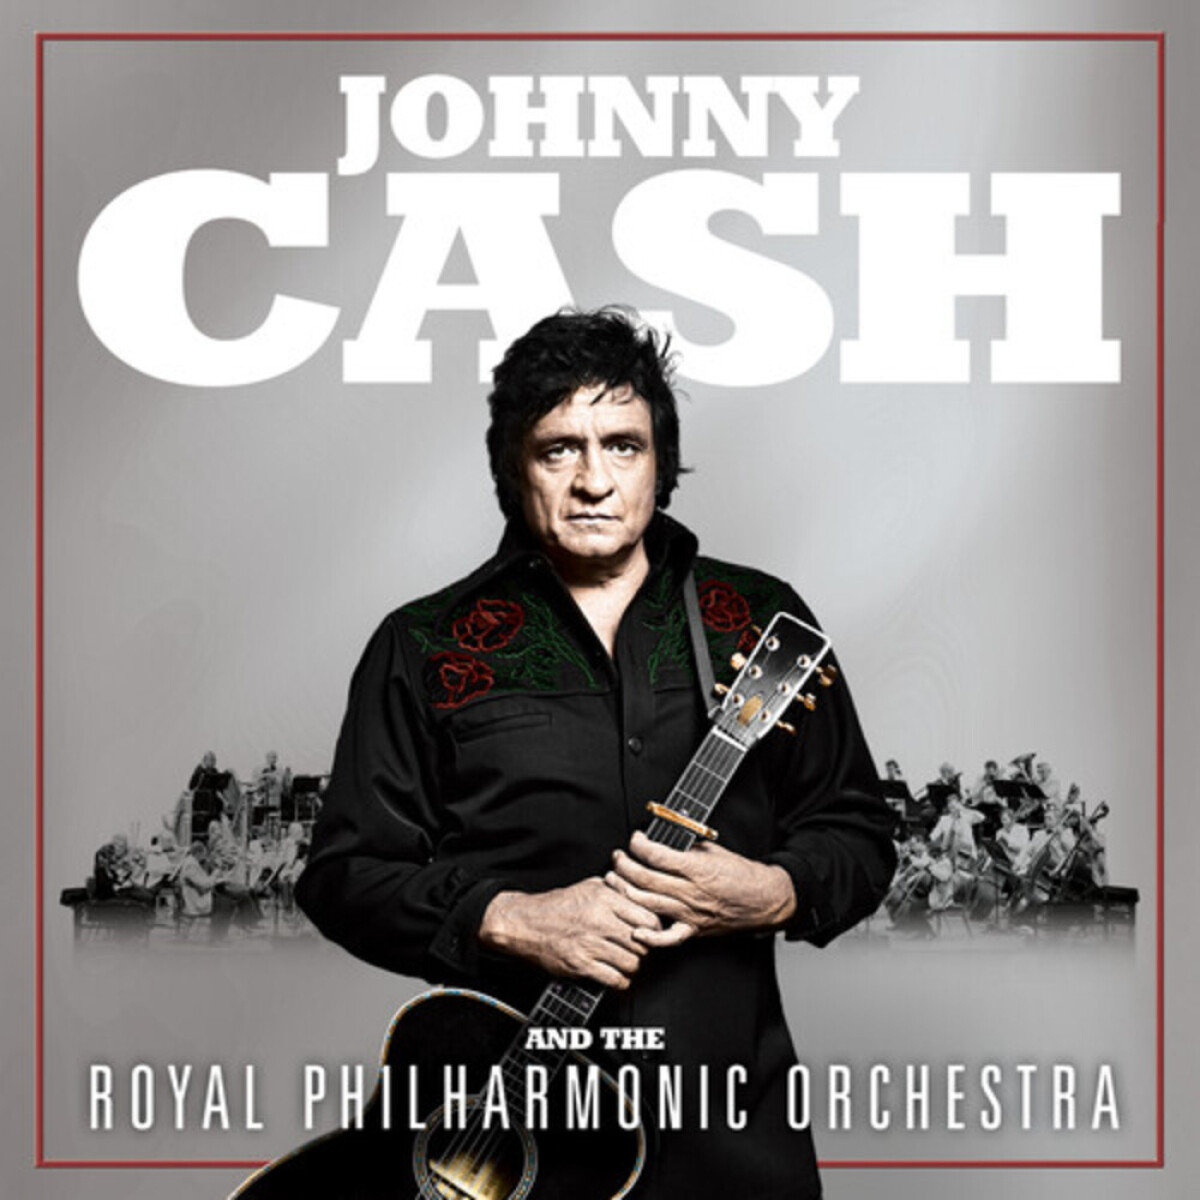 Cash, Johnny - Johnny Cash And The Royal Philharmo (cd) 